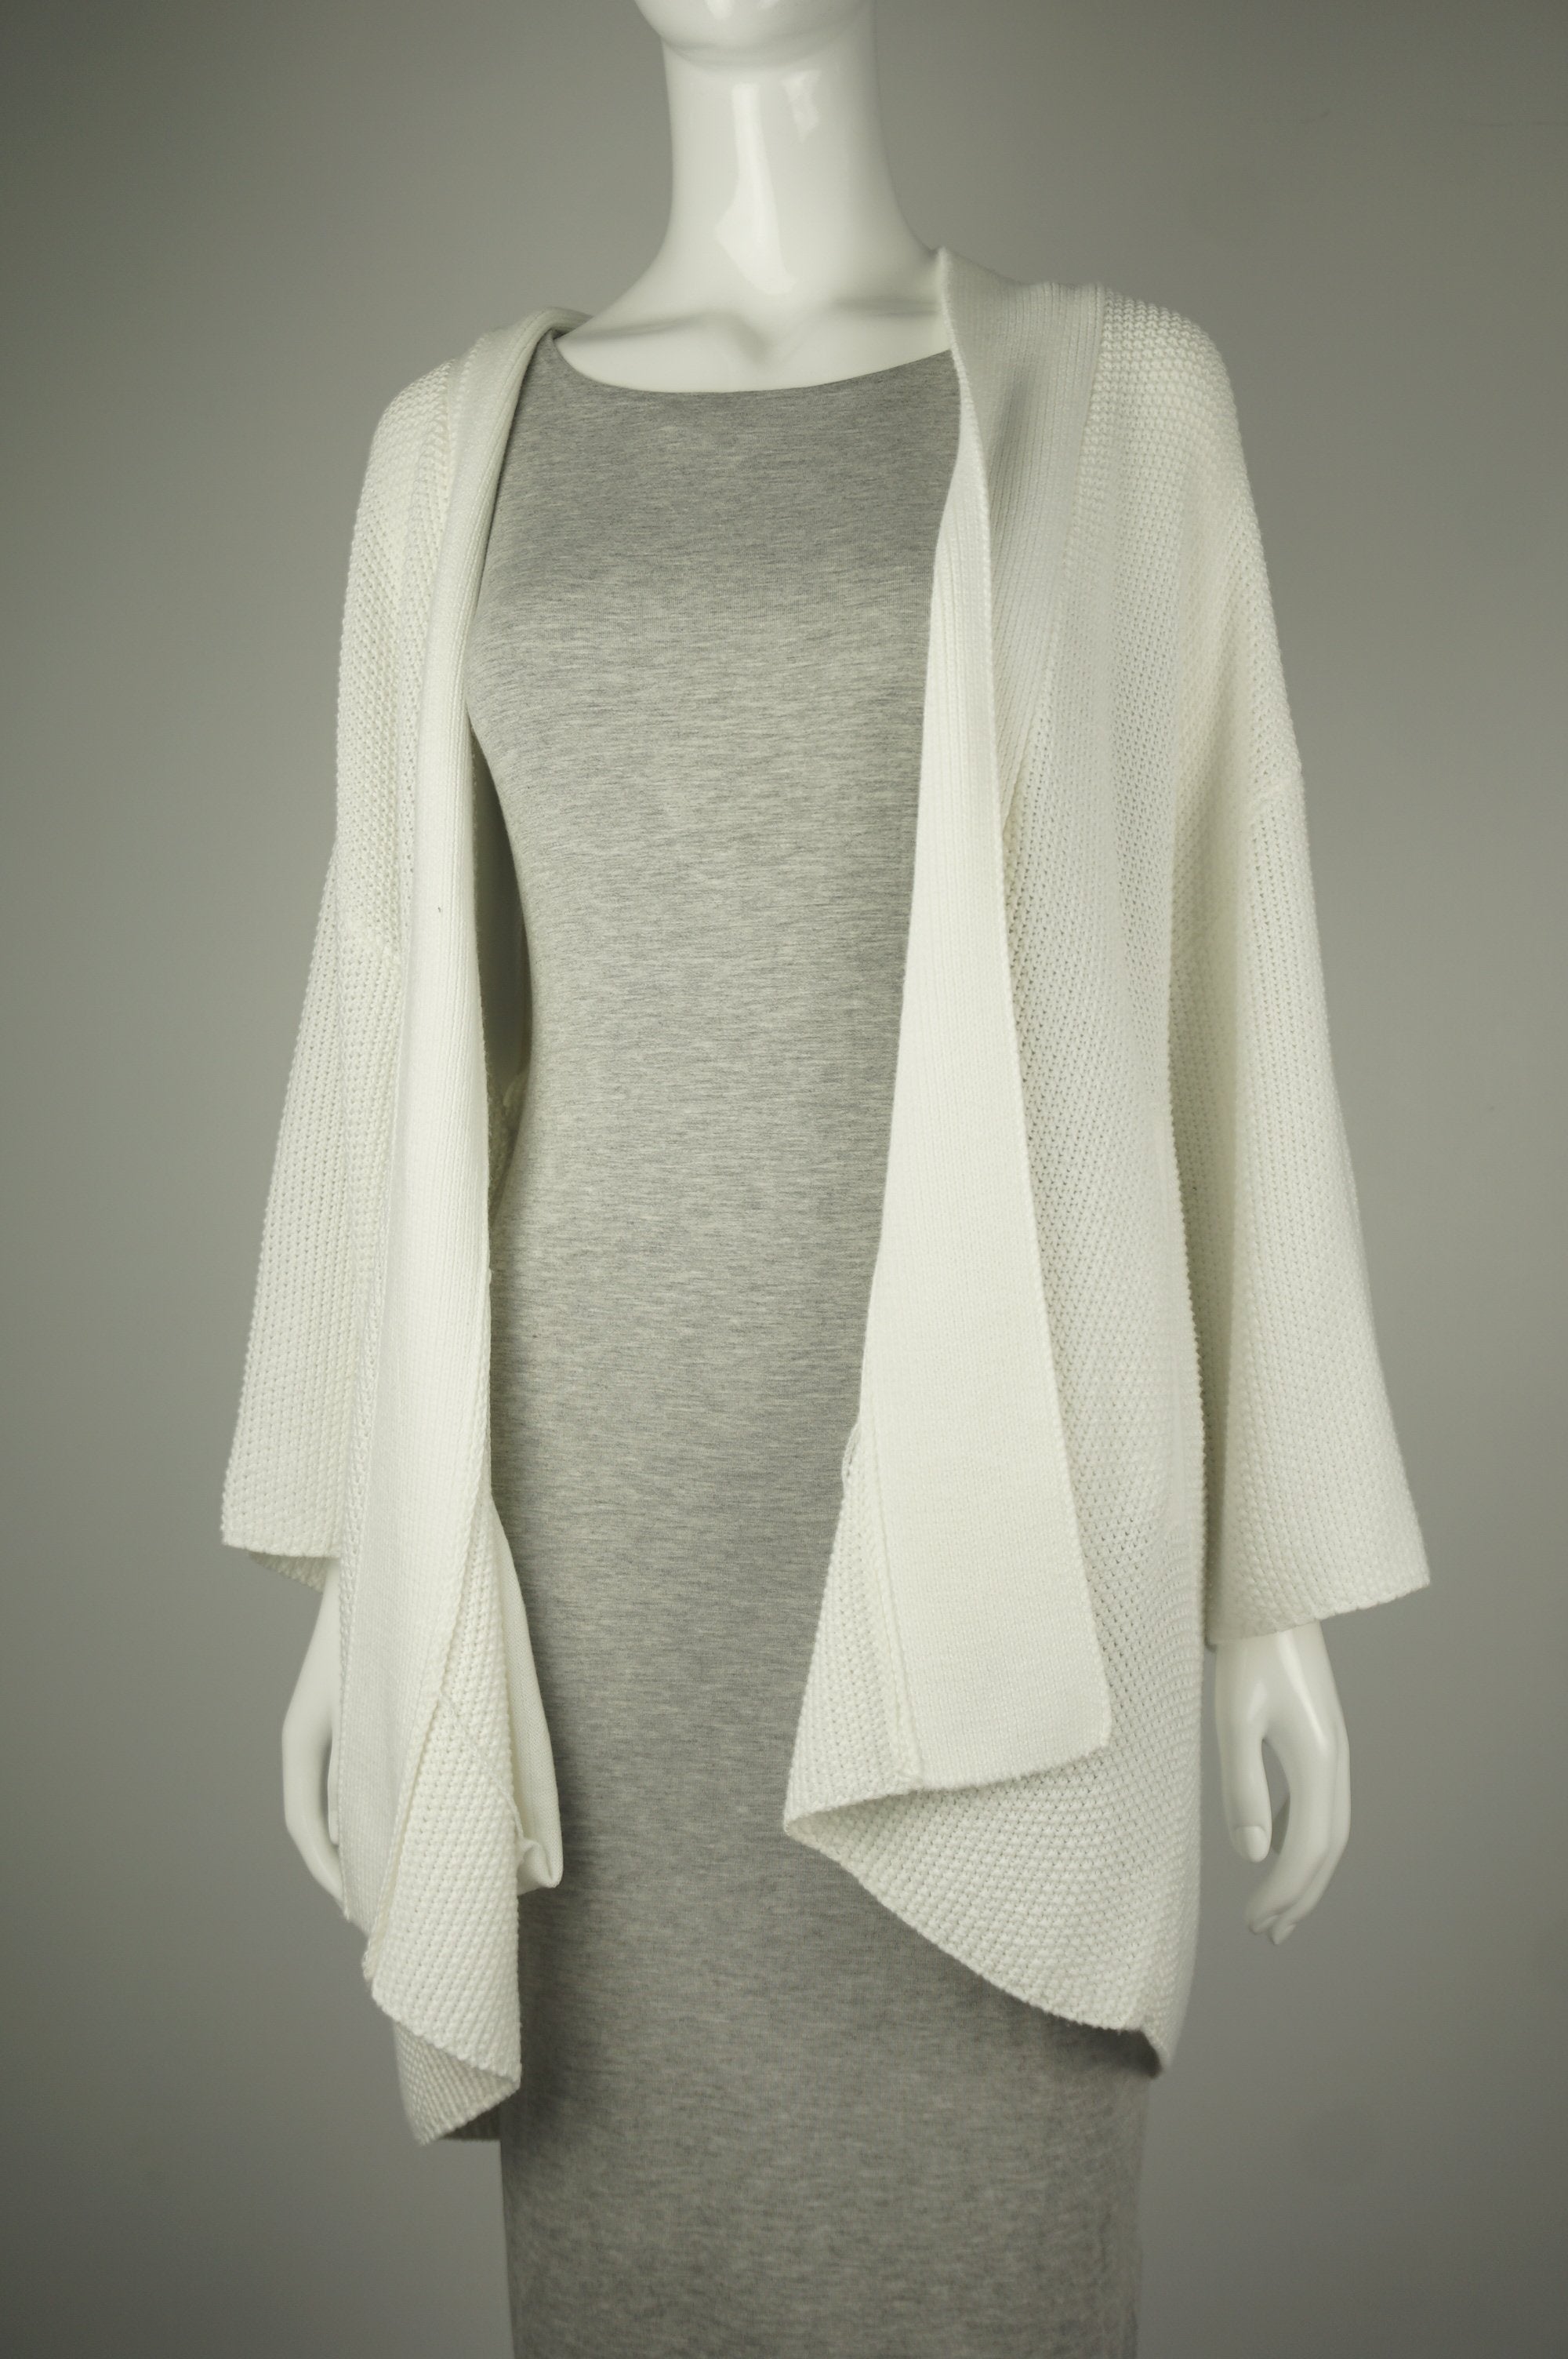 Oak + Fort White Cardigan, Simple and elegant white cardigan for the chilly office., White, 100% polyester, women's Jackets & Coats, women's White Jackets & Coats, Oak + Fort women's Jackets & Coats, Oak + Fort women's cardigan, women's simple cardigan, women's simple and white cardigan, women's drape jacket, women's drape coat